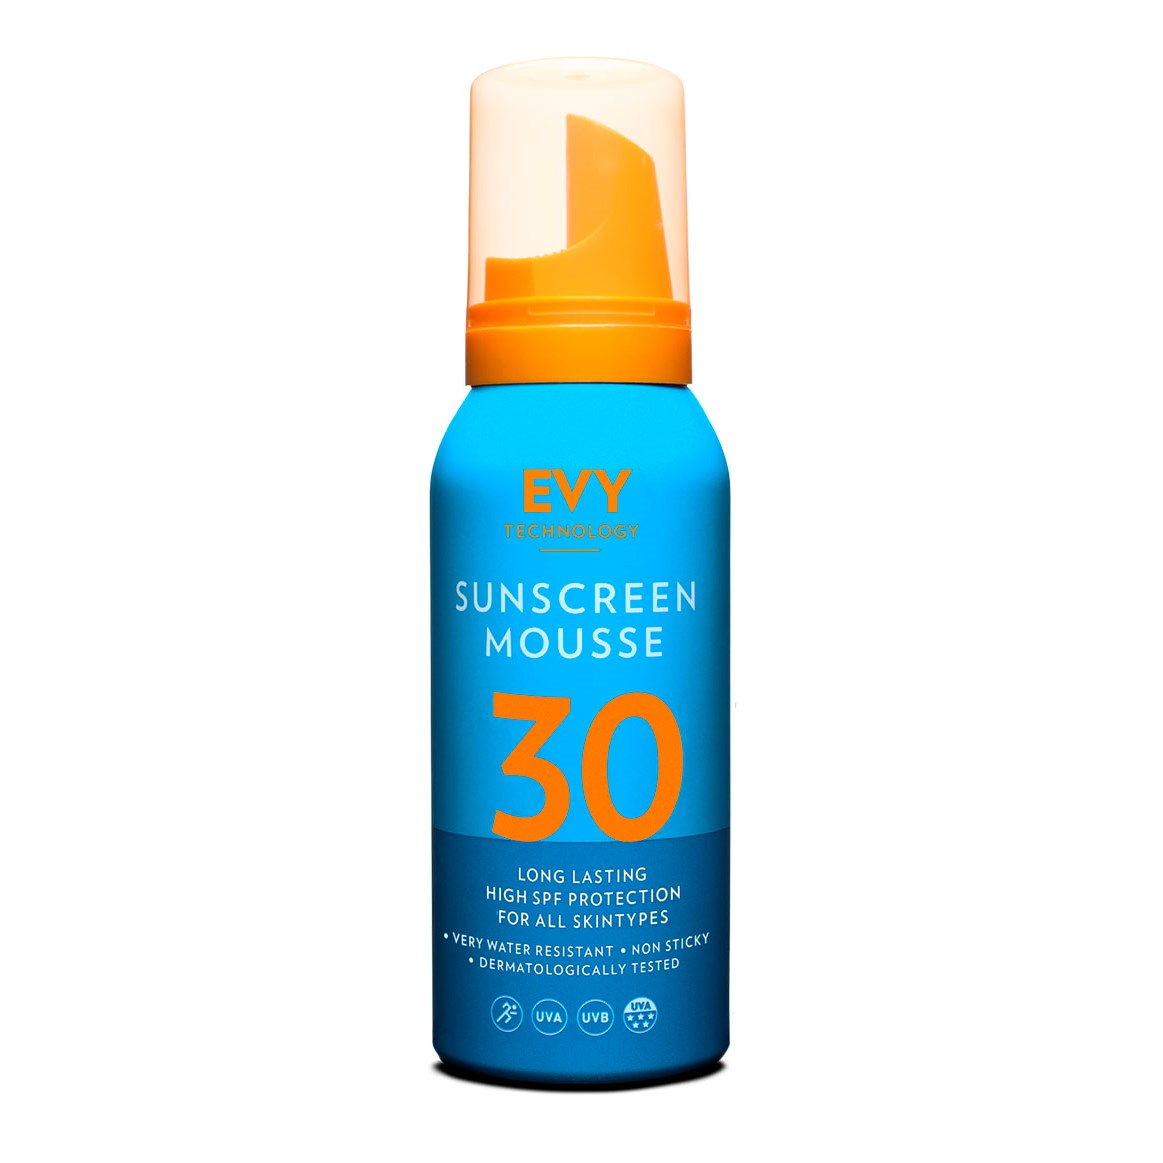 EVY Sunscreen Mousse SPF 30 100 ml